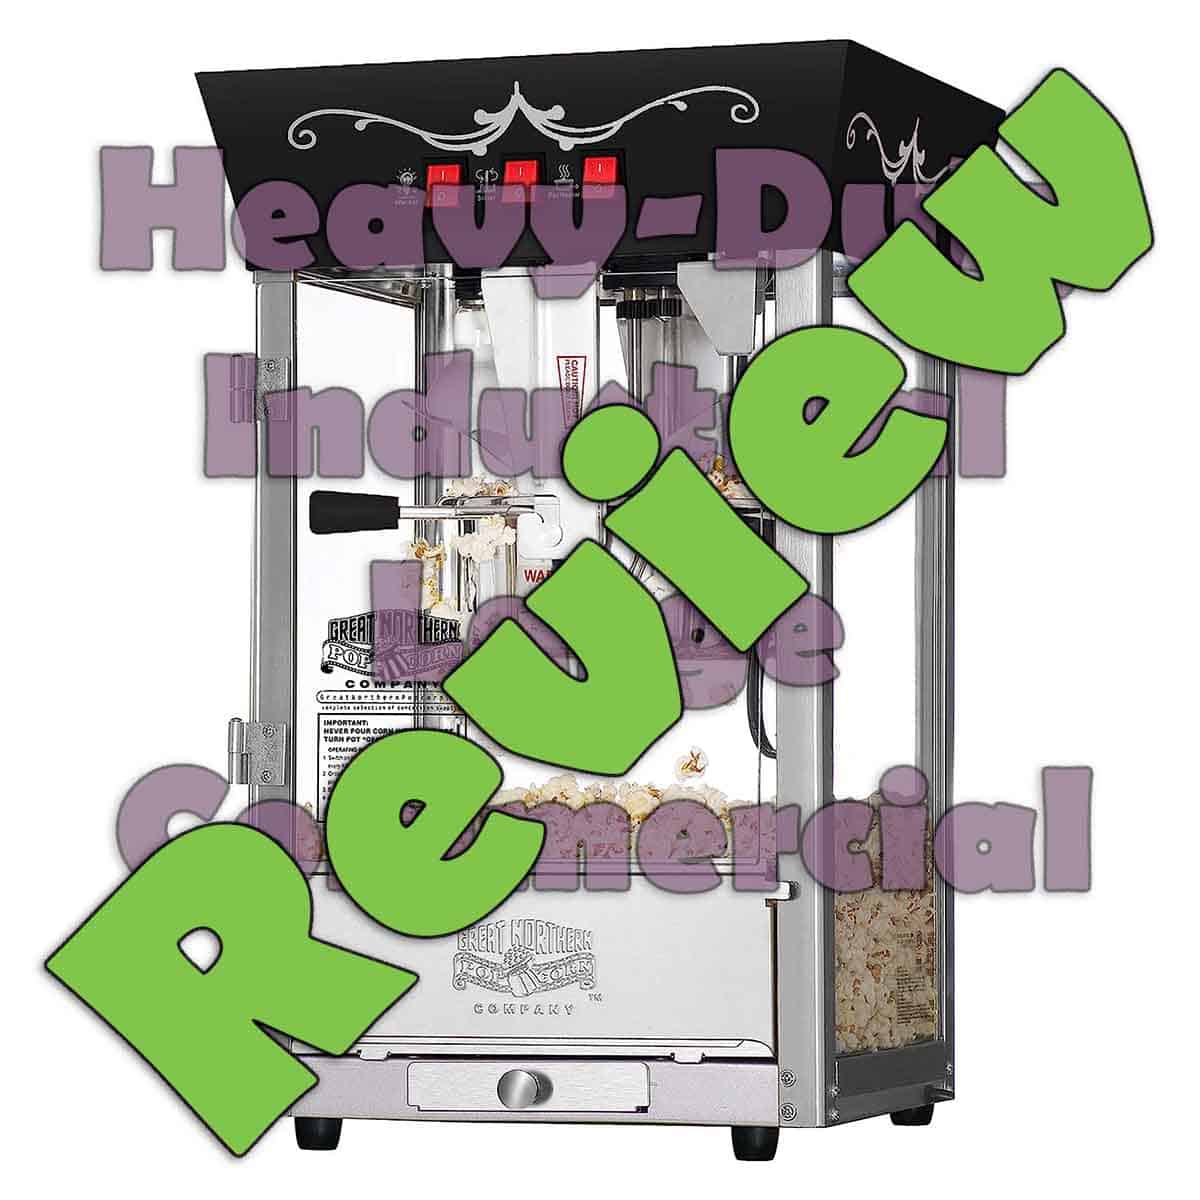 https://leelalicious.com/wp-content/uploads/2023/02/heavyduty-commercial-popcorn-machines-reviewed.jpg